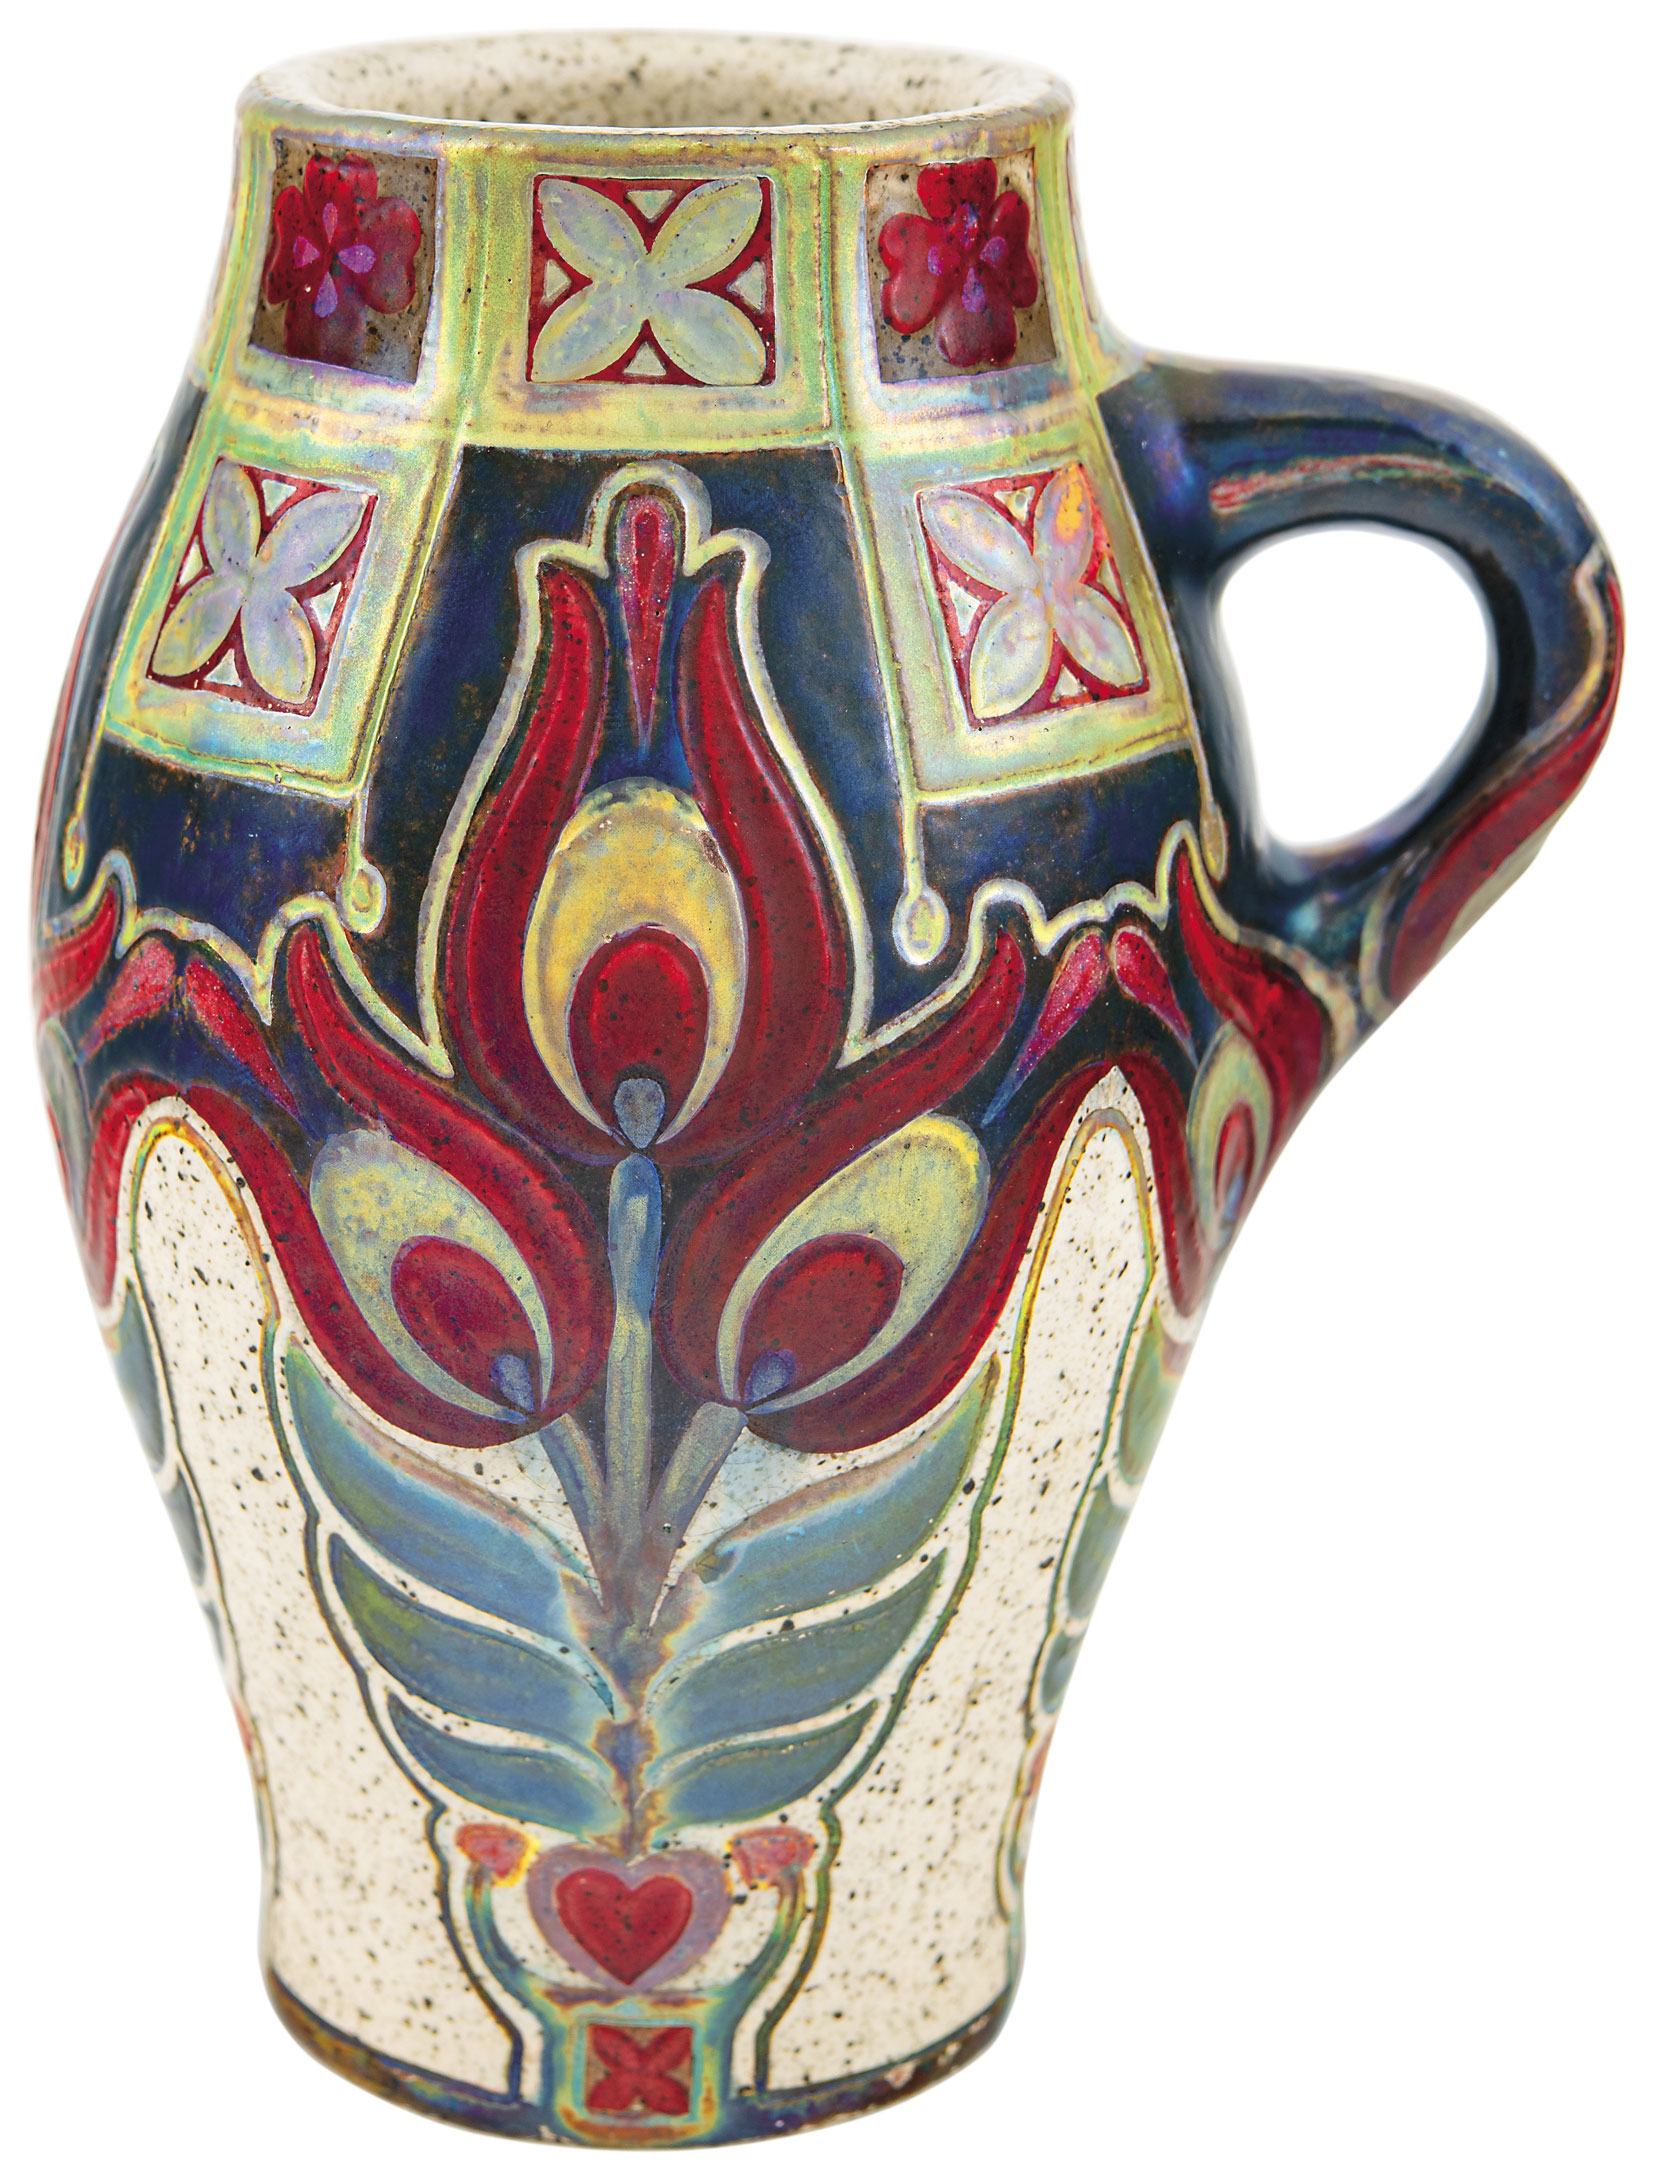 Zsolnay Jug with FOLK MOTIF from the Grés series, 1904